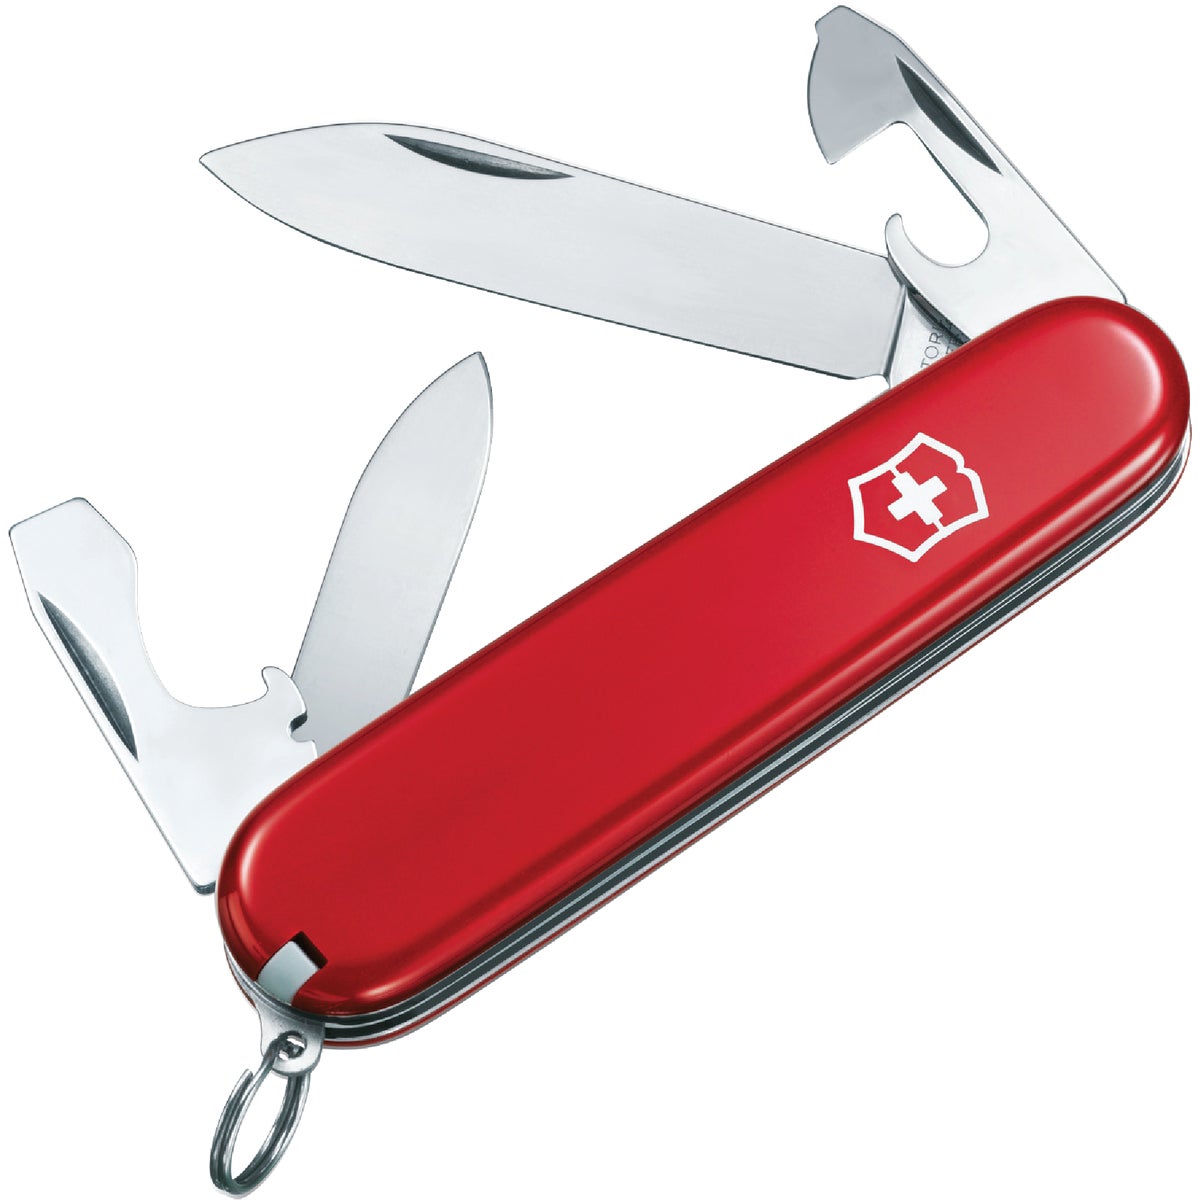 Victorinox Recruit 10-Function 3.3 In. Red Swiss Army Knife